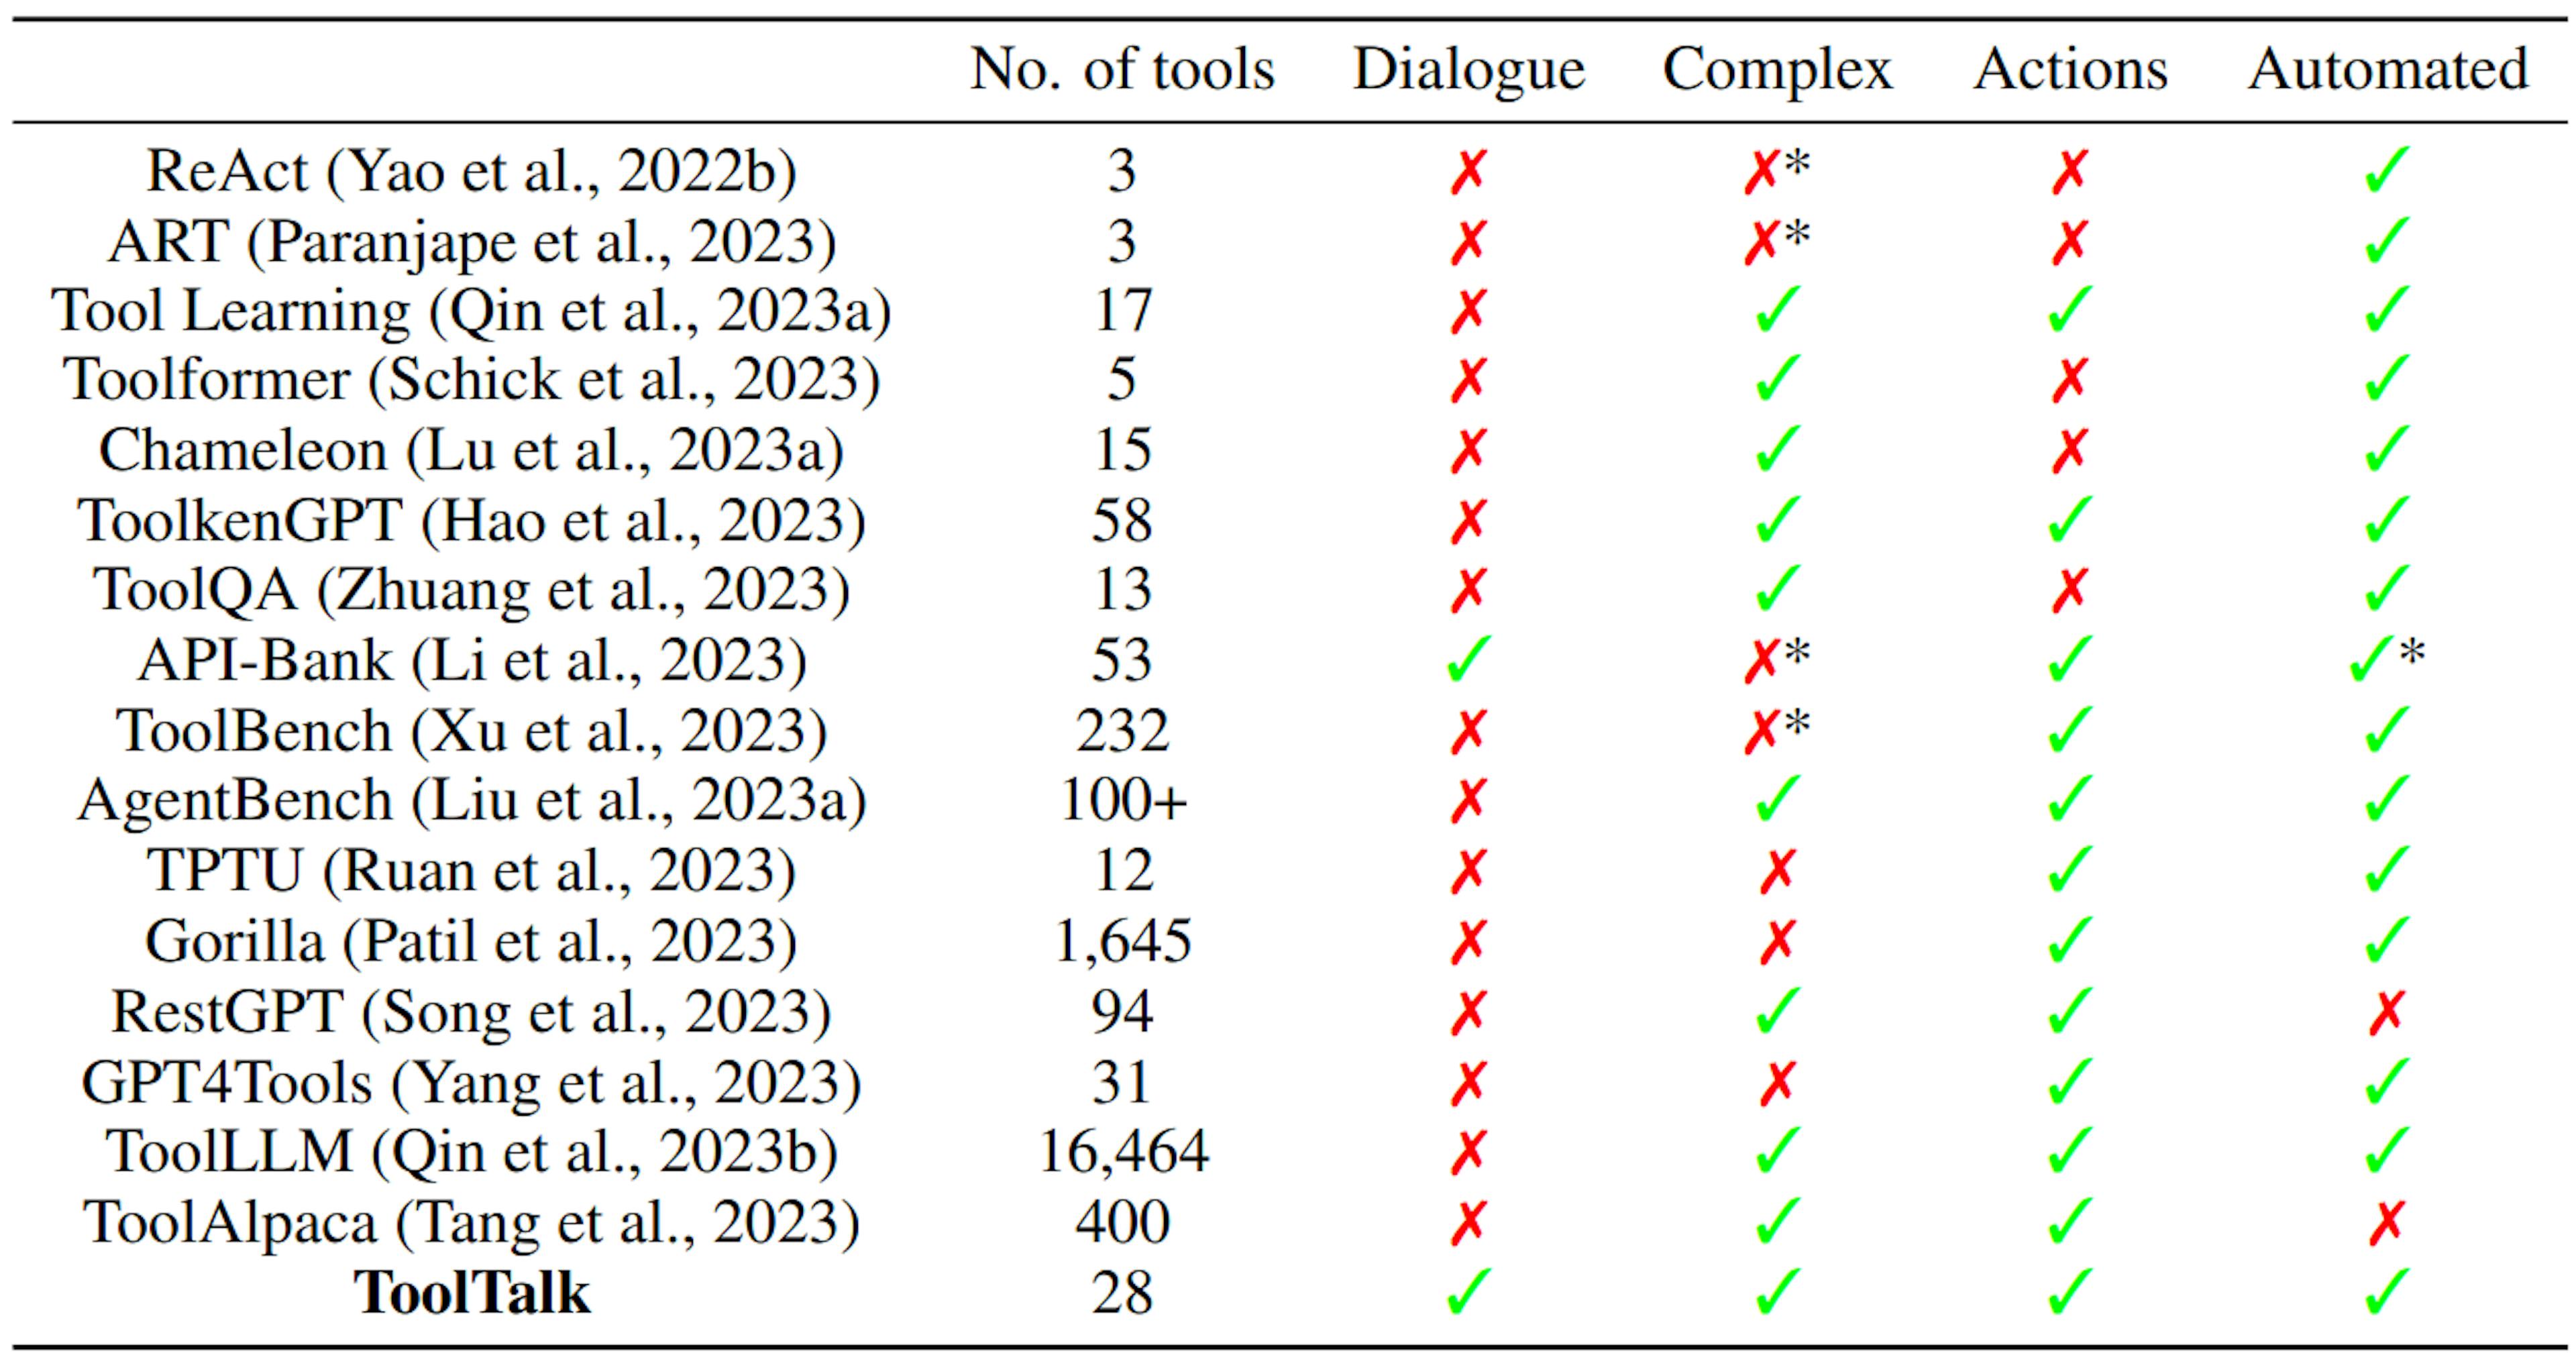 Table 5: Comparison of evaluation used in prior work with ToolTalk. We note total number of tools used (No. of tools), if any task is specified over multiple user utterances (dialogue), if any task requires more than 1-2 tools to complete (complex), if any task requires the use of action tools (actions), and if all evaluation is done automatically (automated). We note nuances in prior work denoted by “*” in Appendix D.